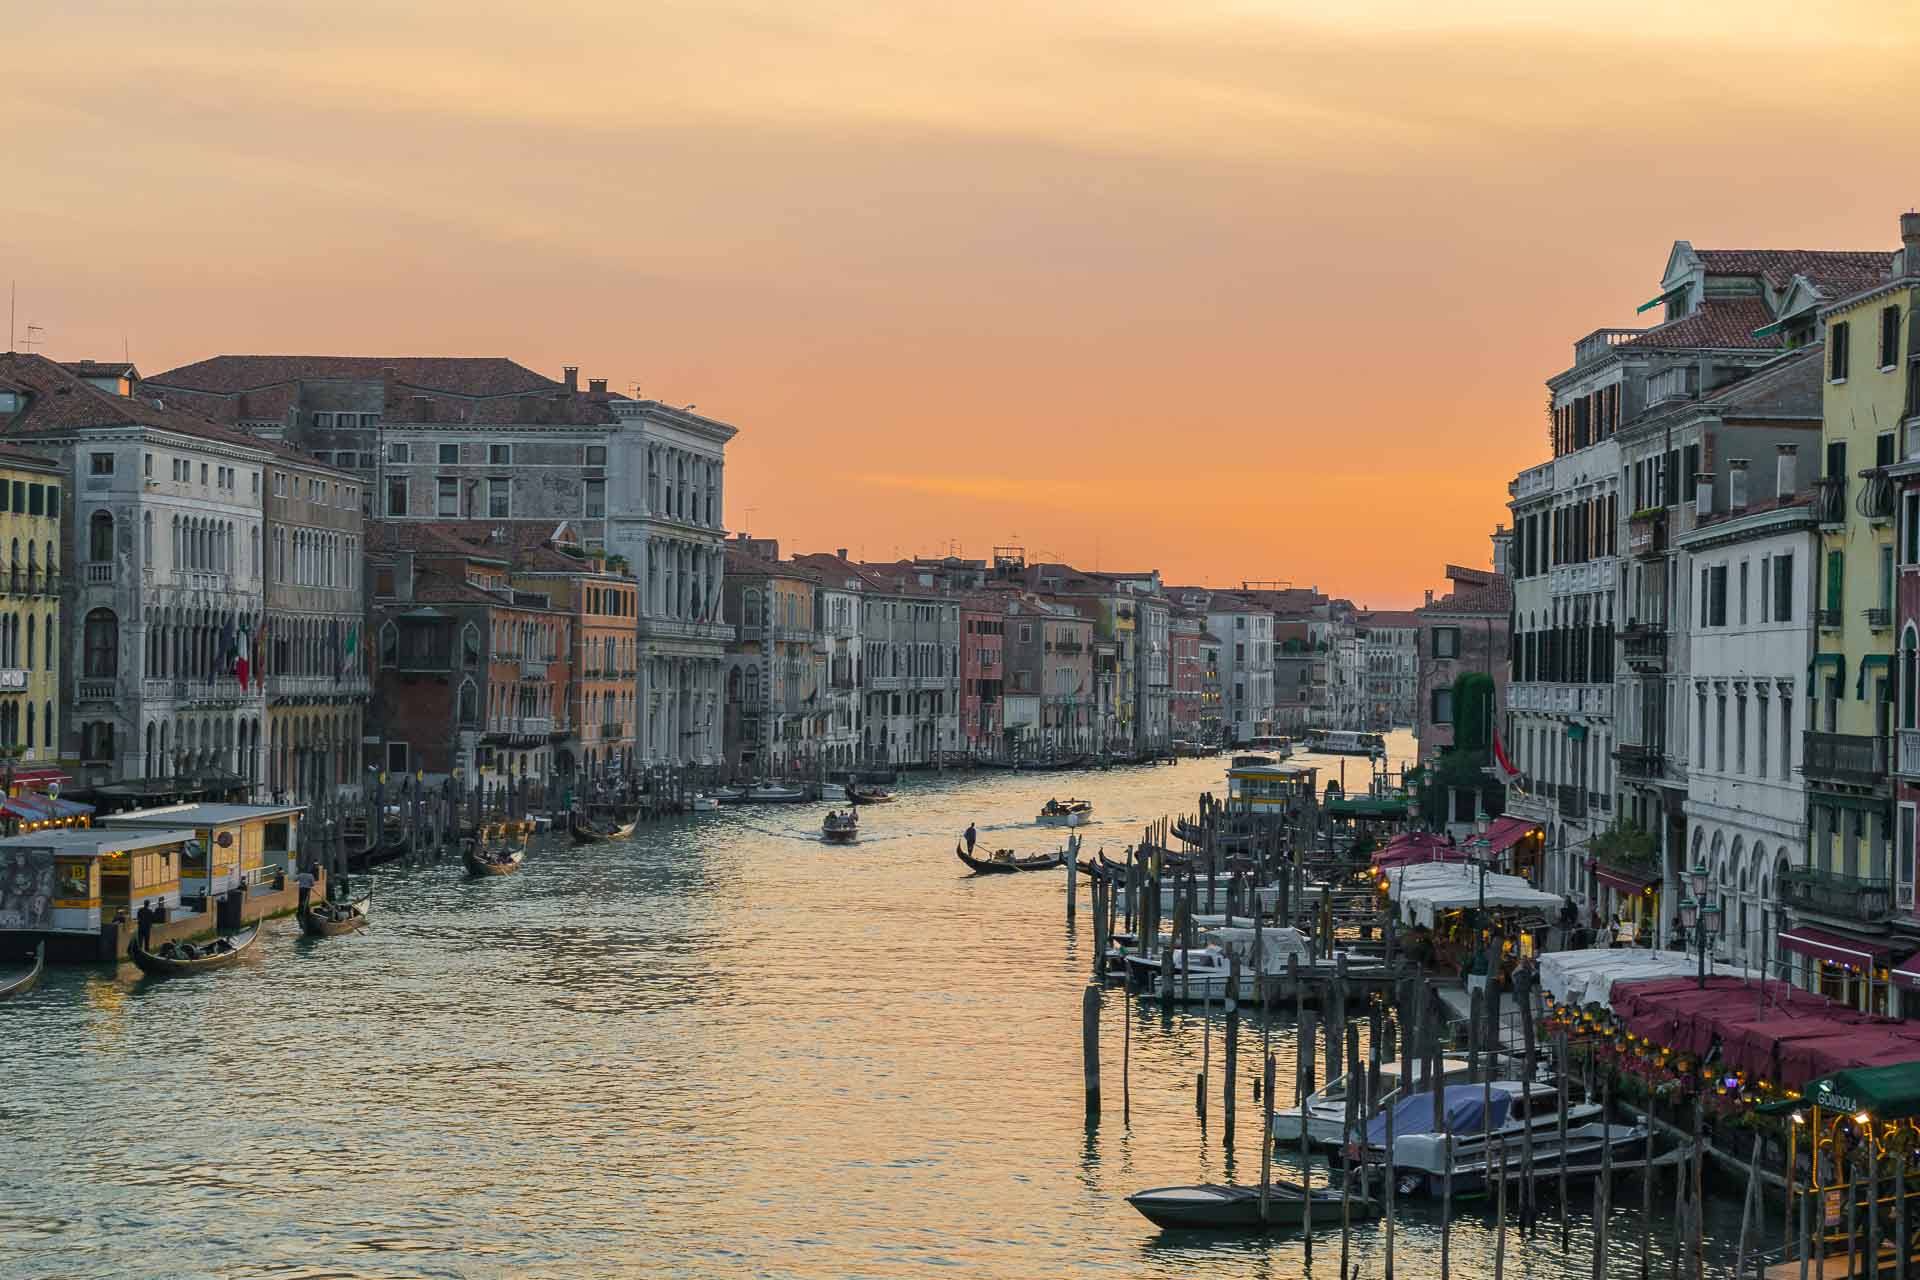 Venice at dusk with the river in the middle and many houses on its margin